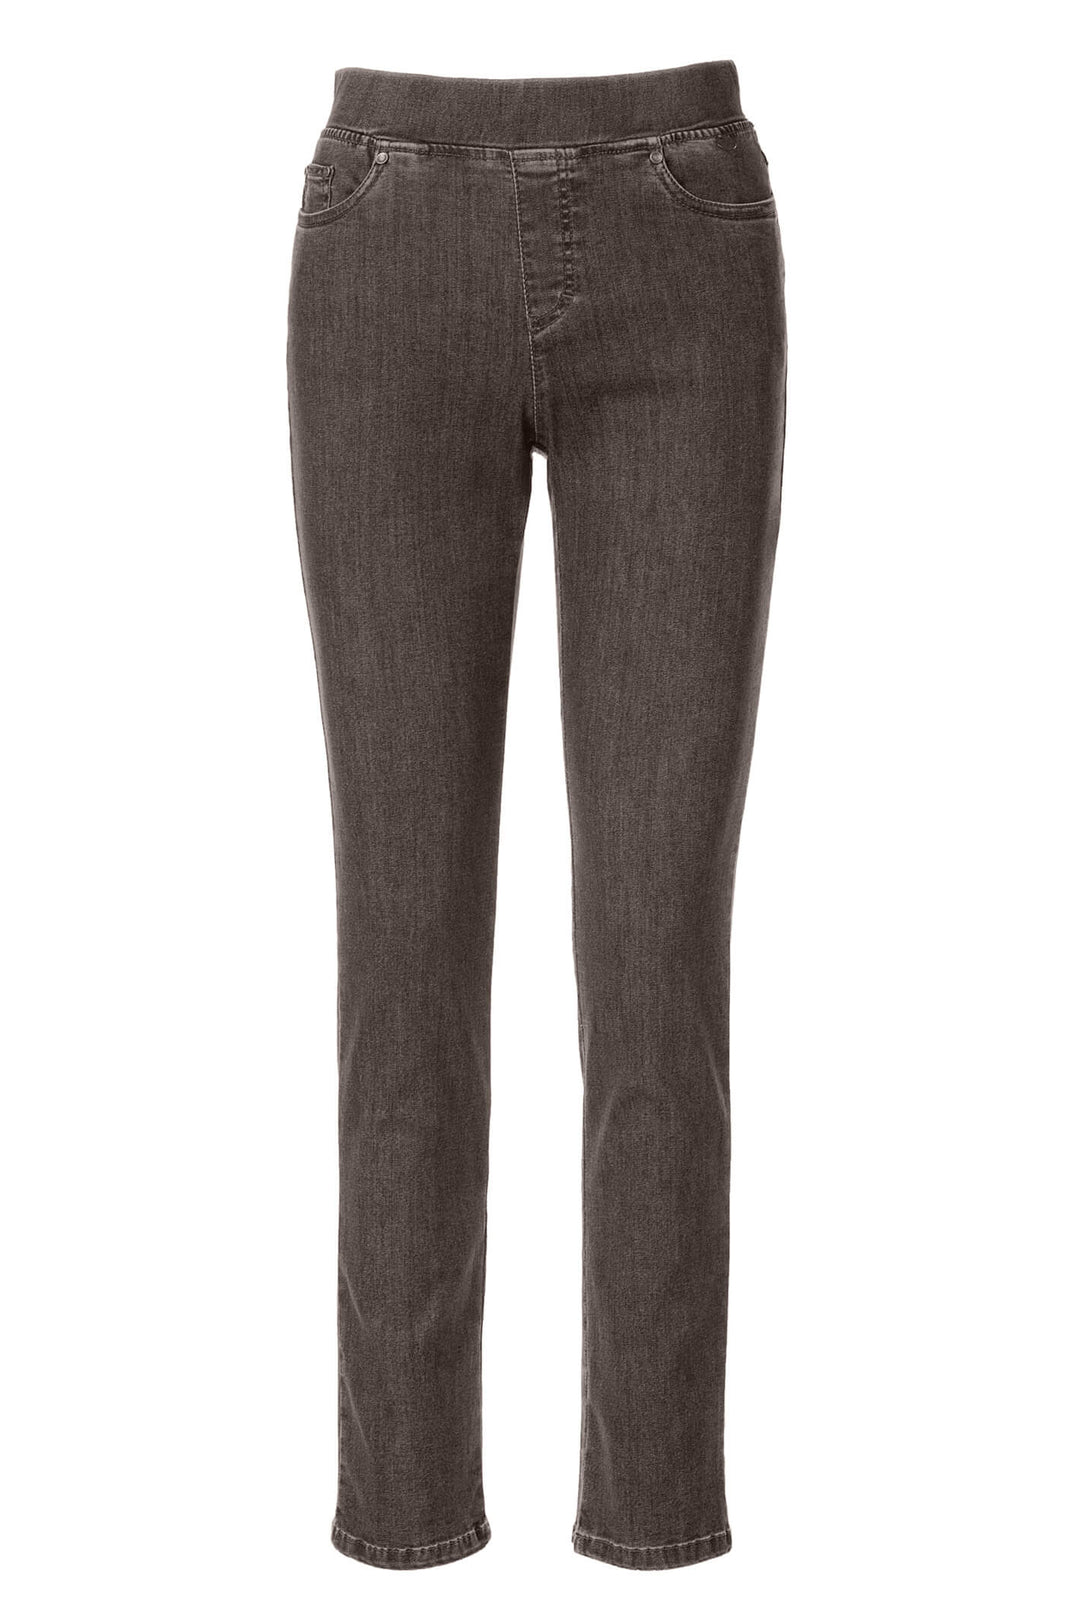 Anna Montana 1002 Angelika 182 Nougat Brown Slim Fit Pull On Jeans - Shirley Allum Boutique